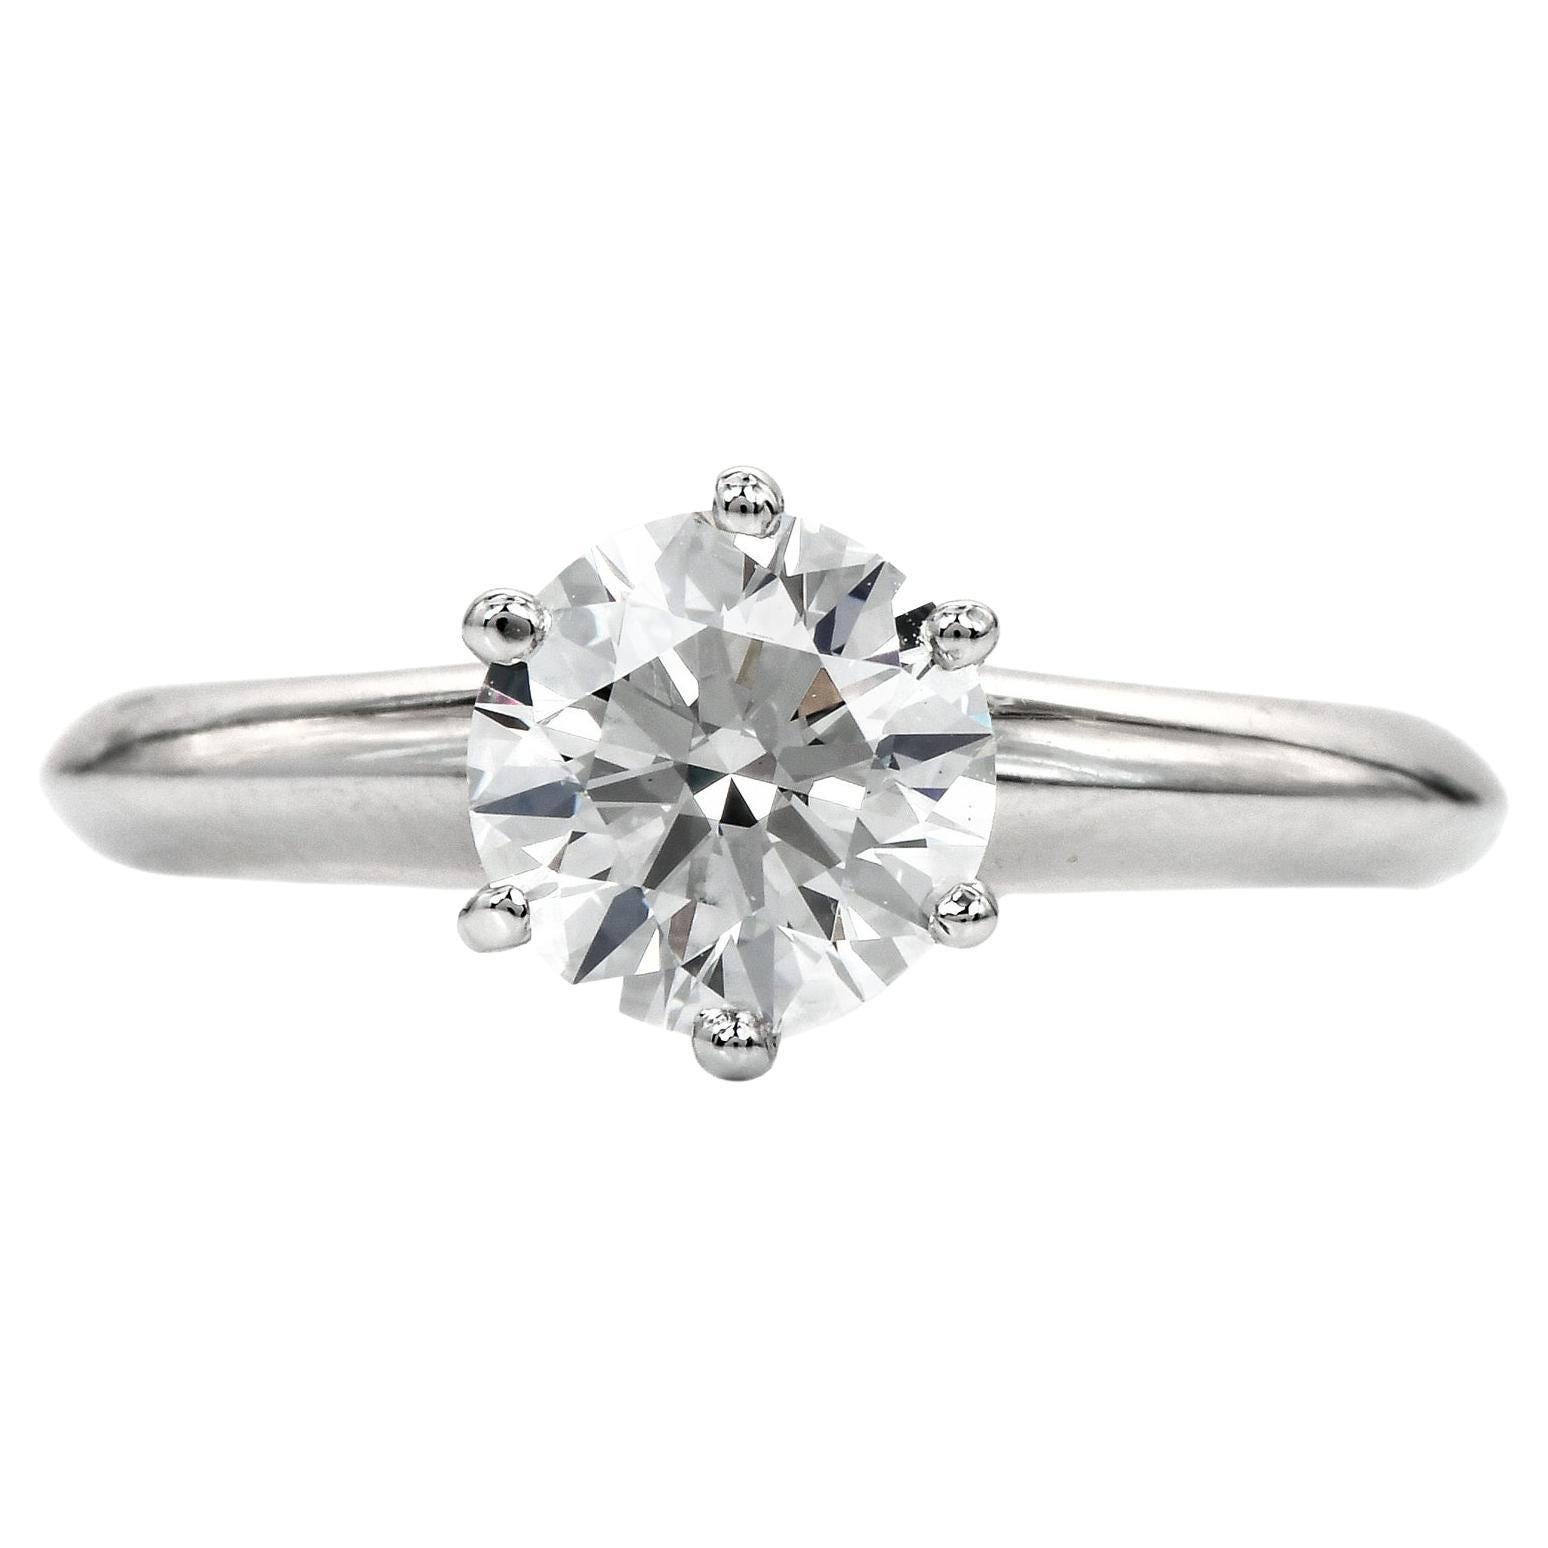 Tiffany & Co. GIA Diamond Platinum Solitaire "The Tiffany" Engagment Ring For Sale